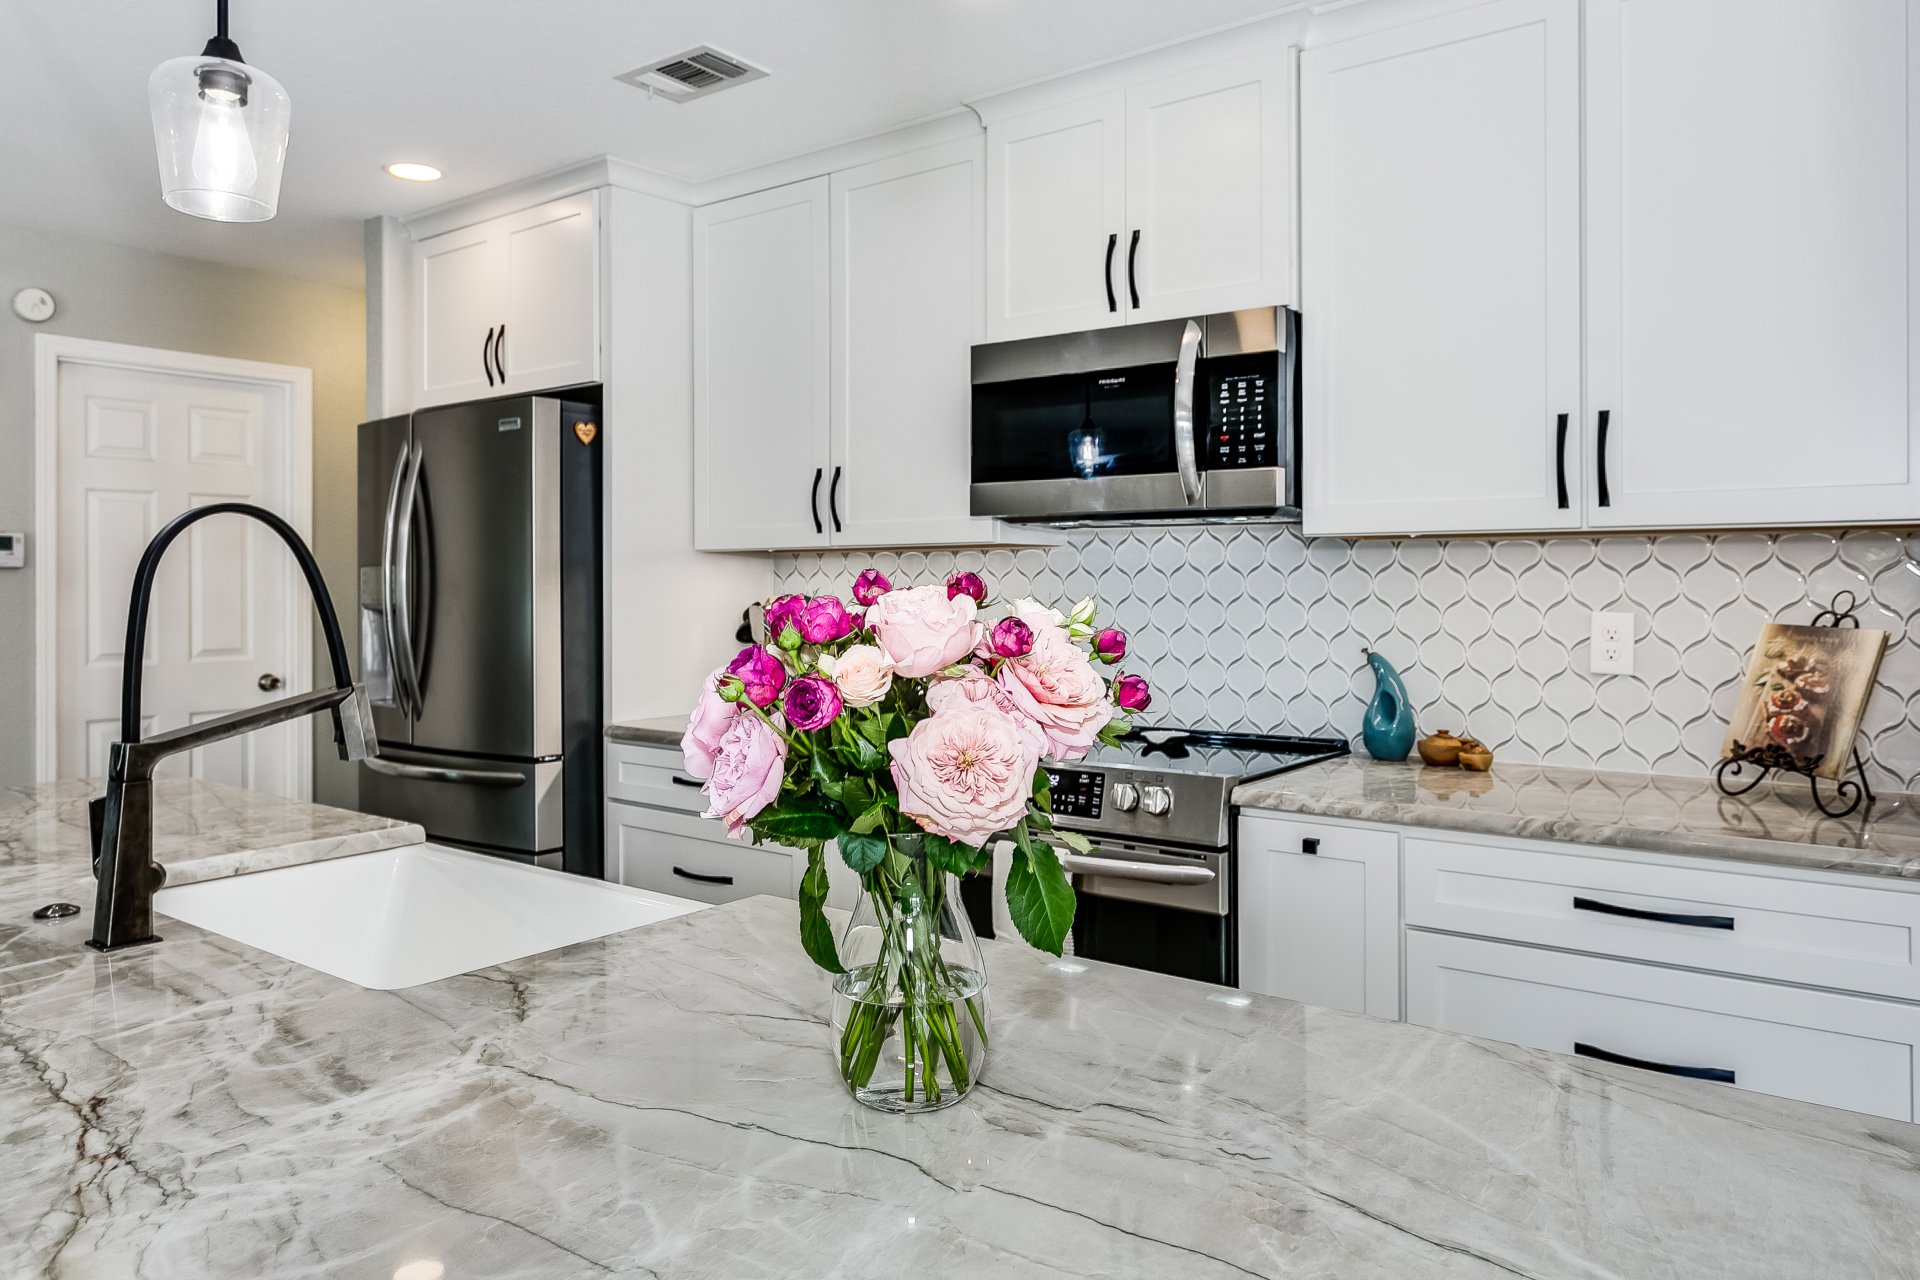 Cooking and entertaining are a joy in this newly remodeled kitchen